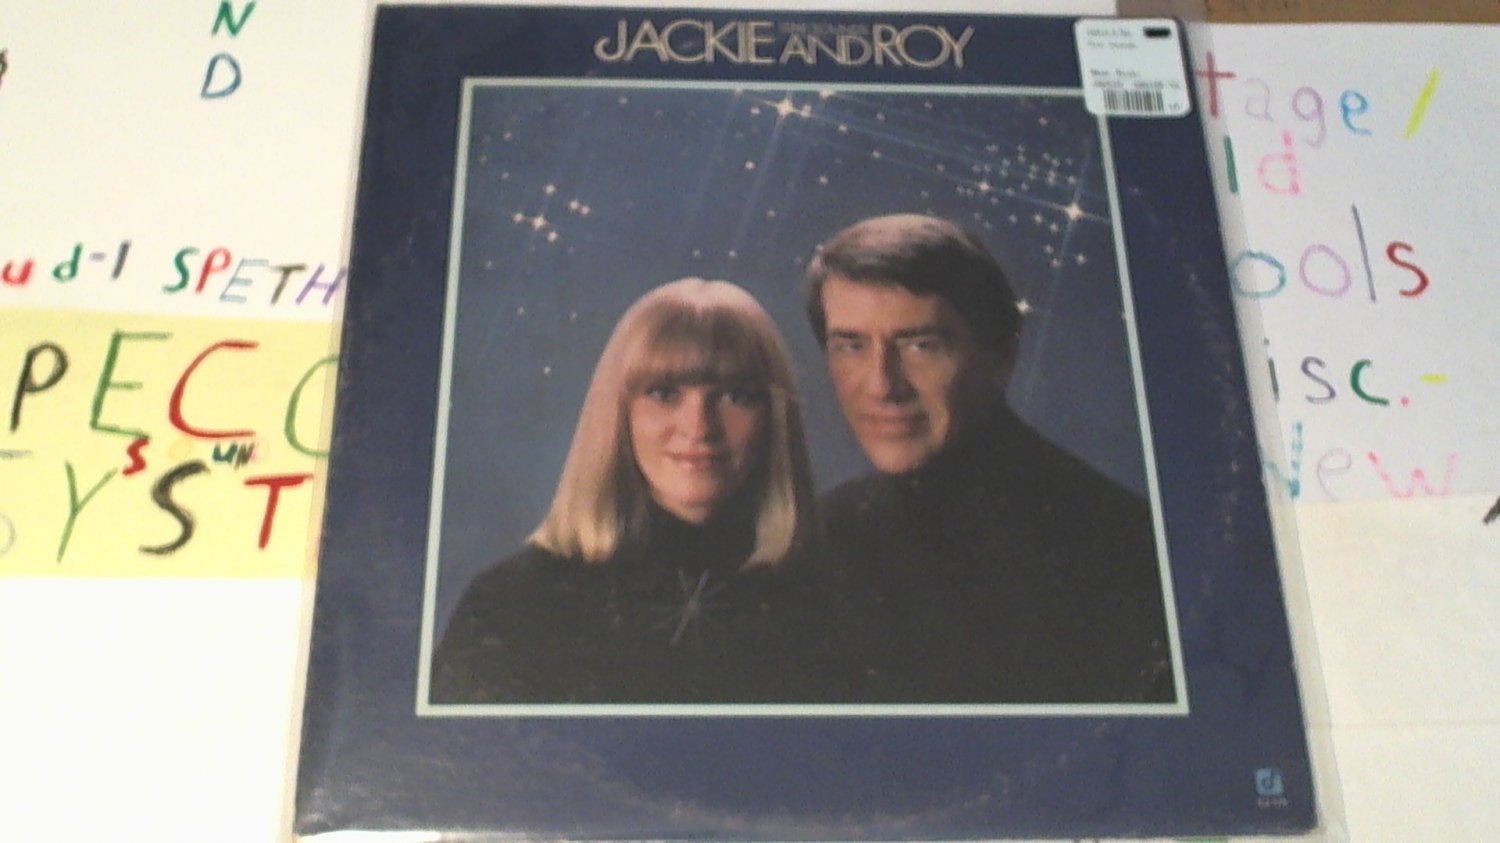 artiste: Jackie & Roy title: Star Sounds label: Concord Jazz year: 1980' Used LP